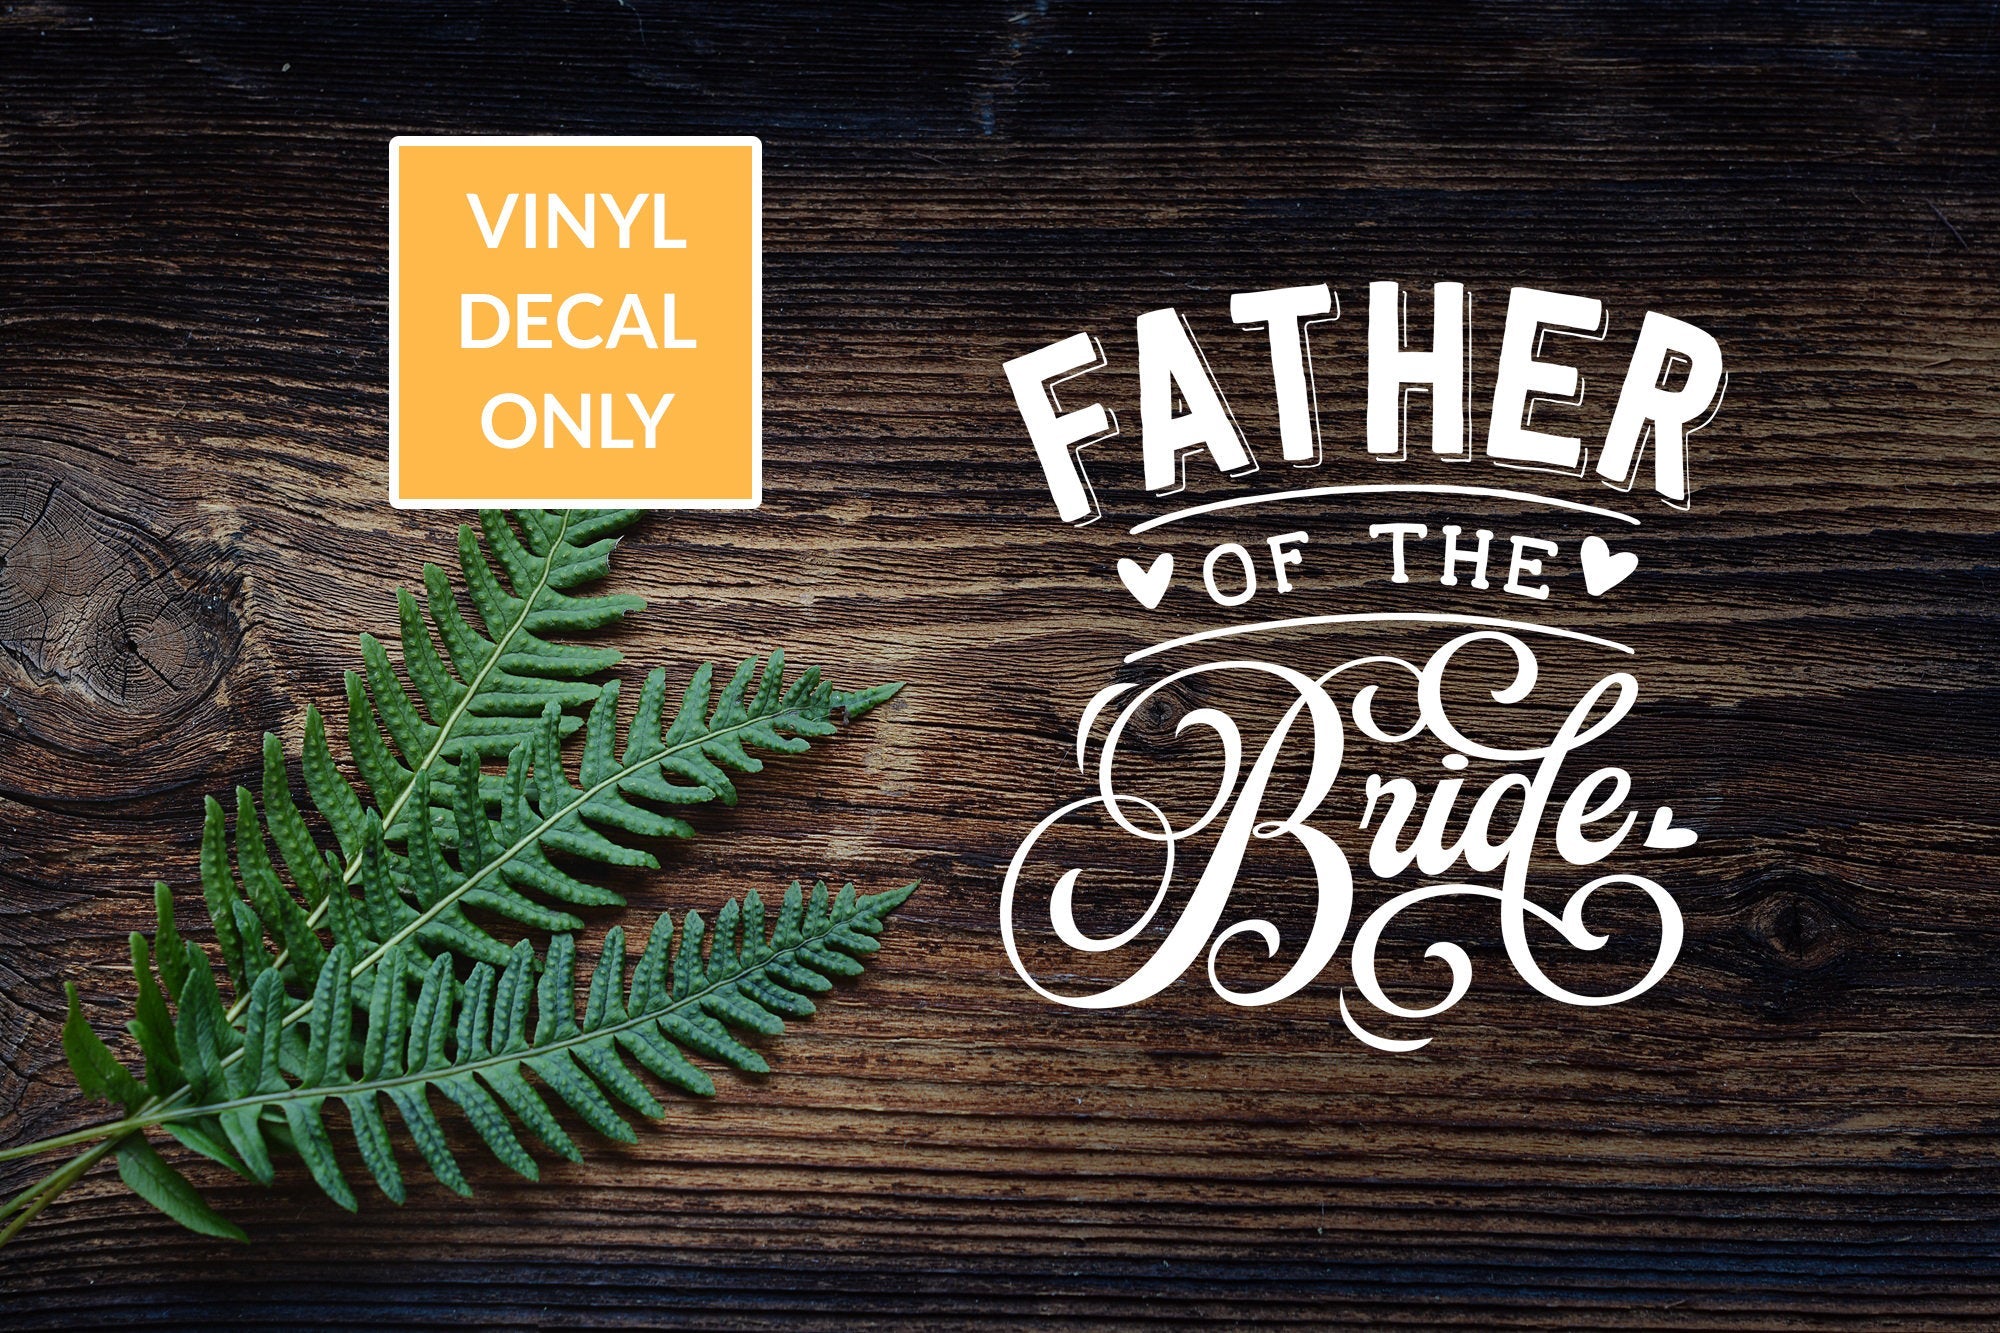 Father of the Bride decal - Permanent Vinyl Decal for Glass, Metal, Wood Signs, and other Smooth Surfaces